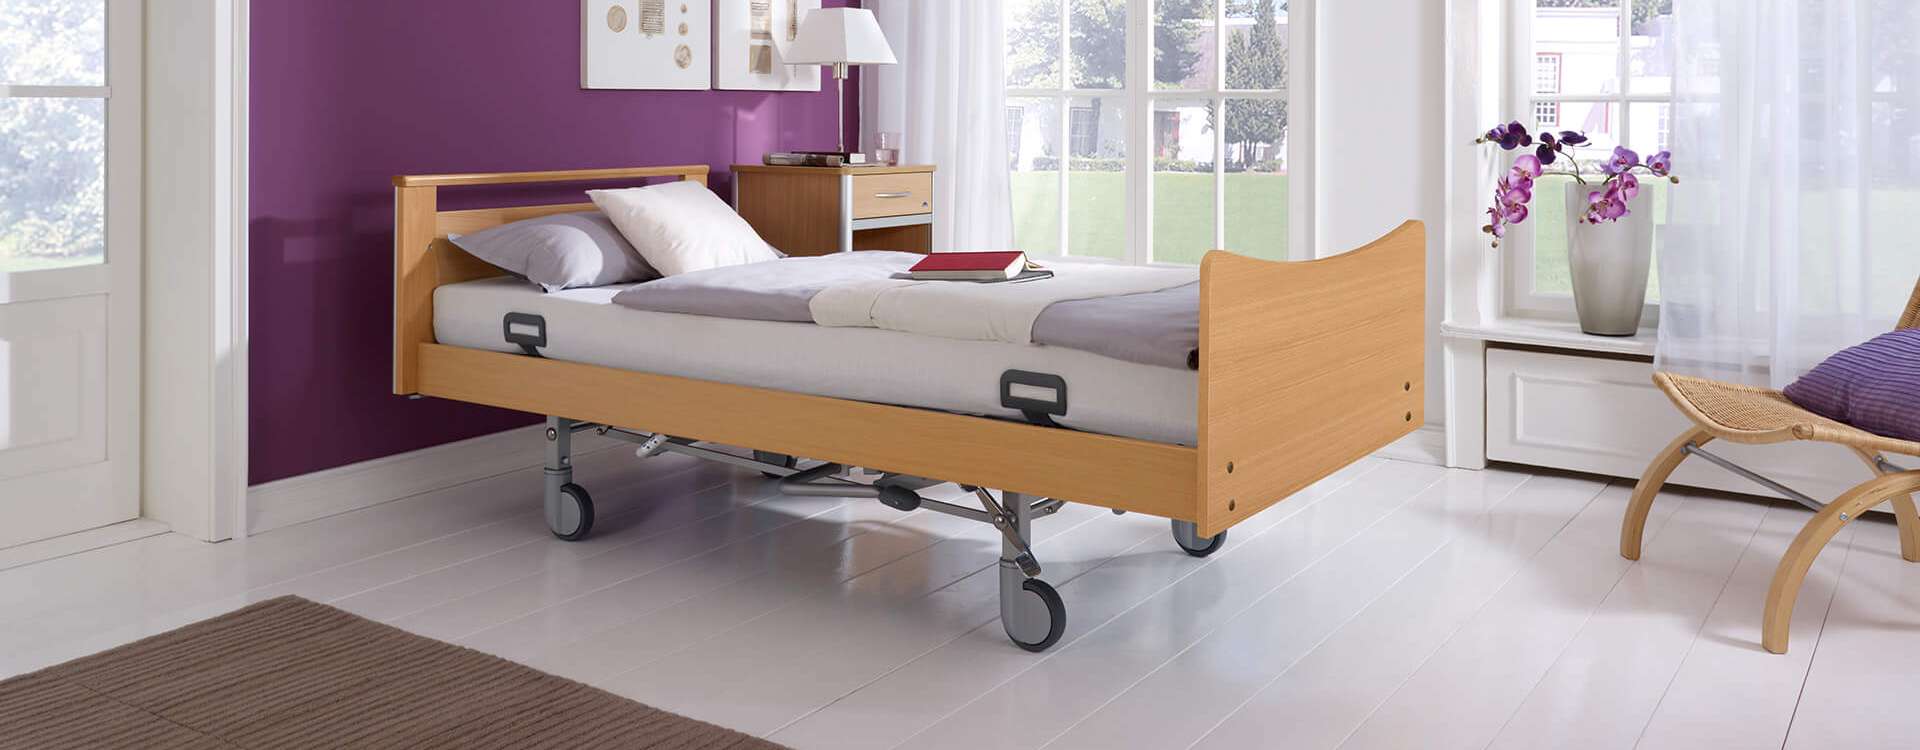 Classiko care bed without safety sides